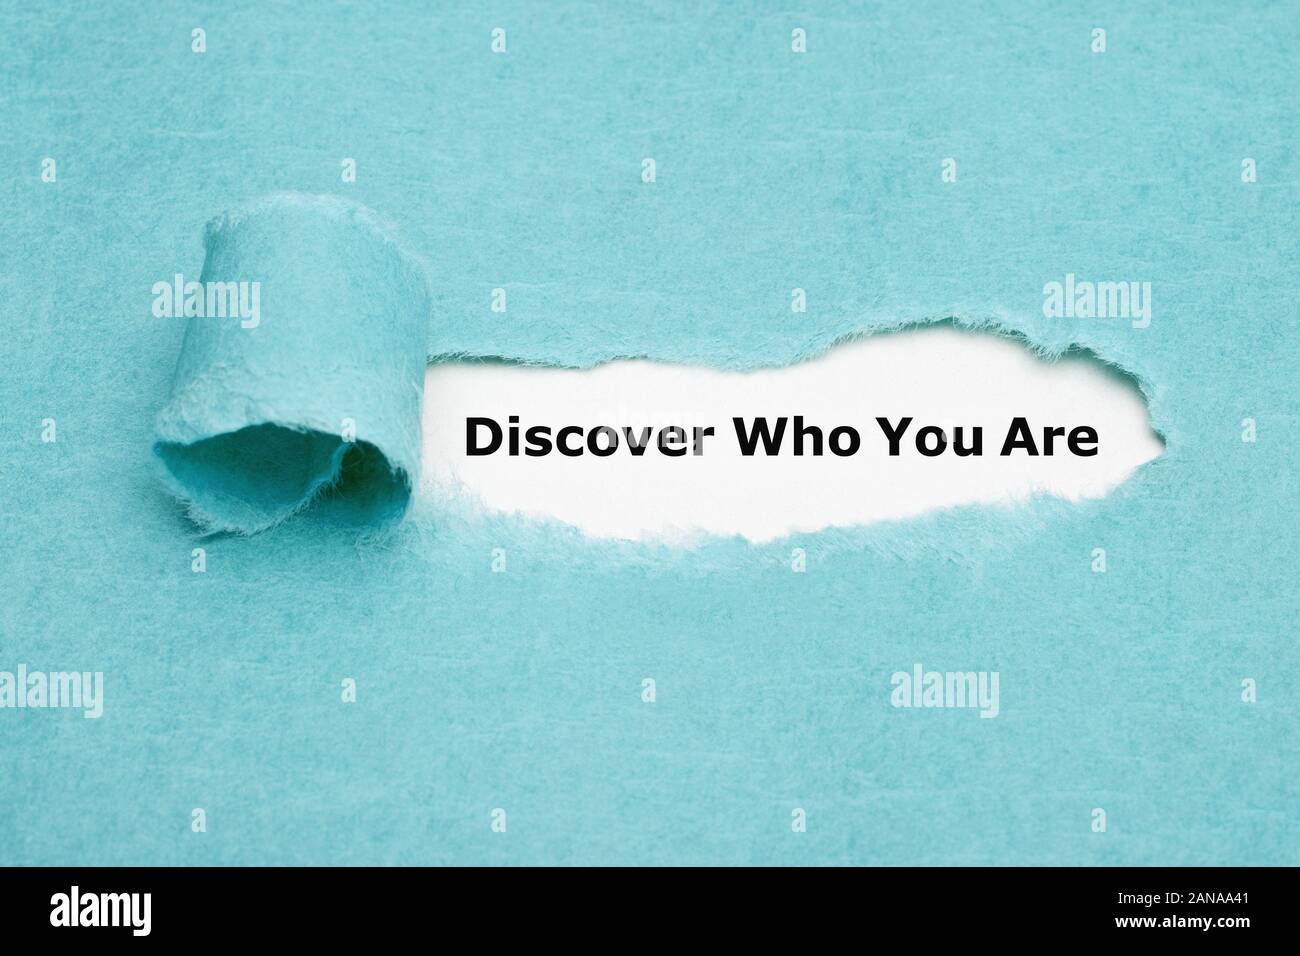 Text Discover Who You Are appearing behind torn blue paper. Finding yourself or personal development concept. Stock Photo